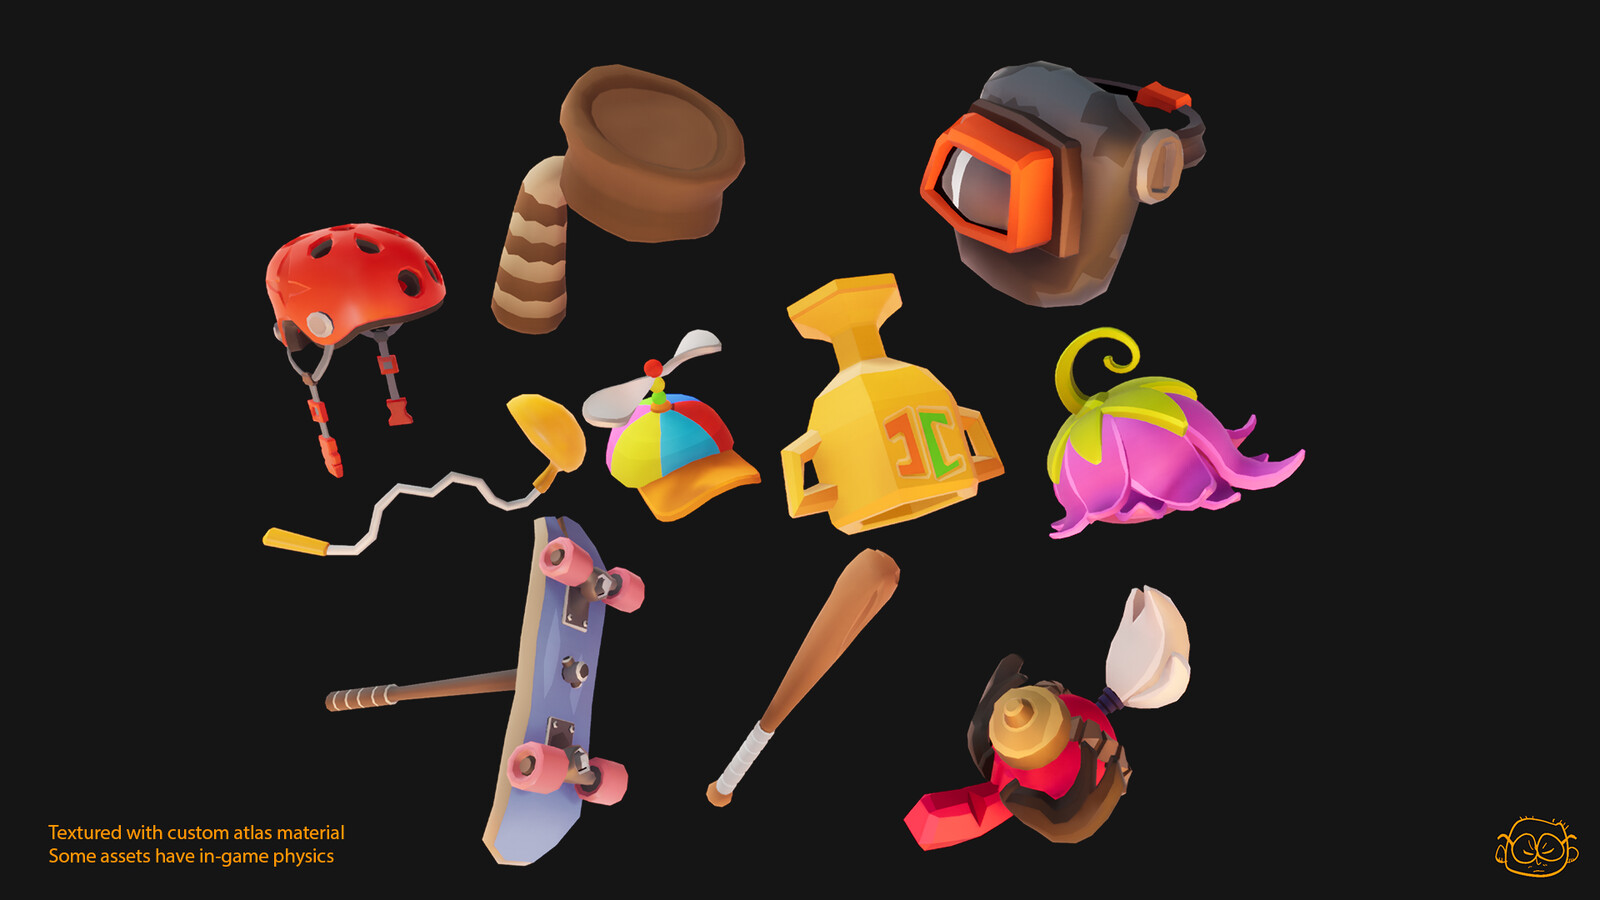 Overview of the hats and hammers I made during my time working on D-Corp